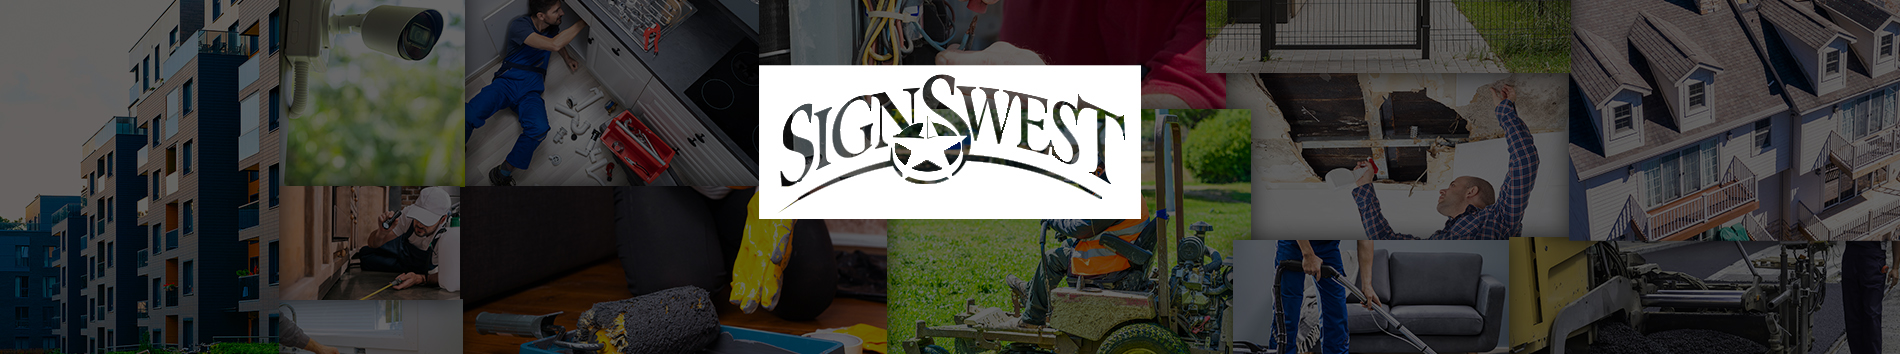 Signs West, Inc.